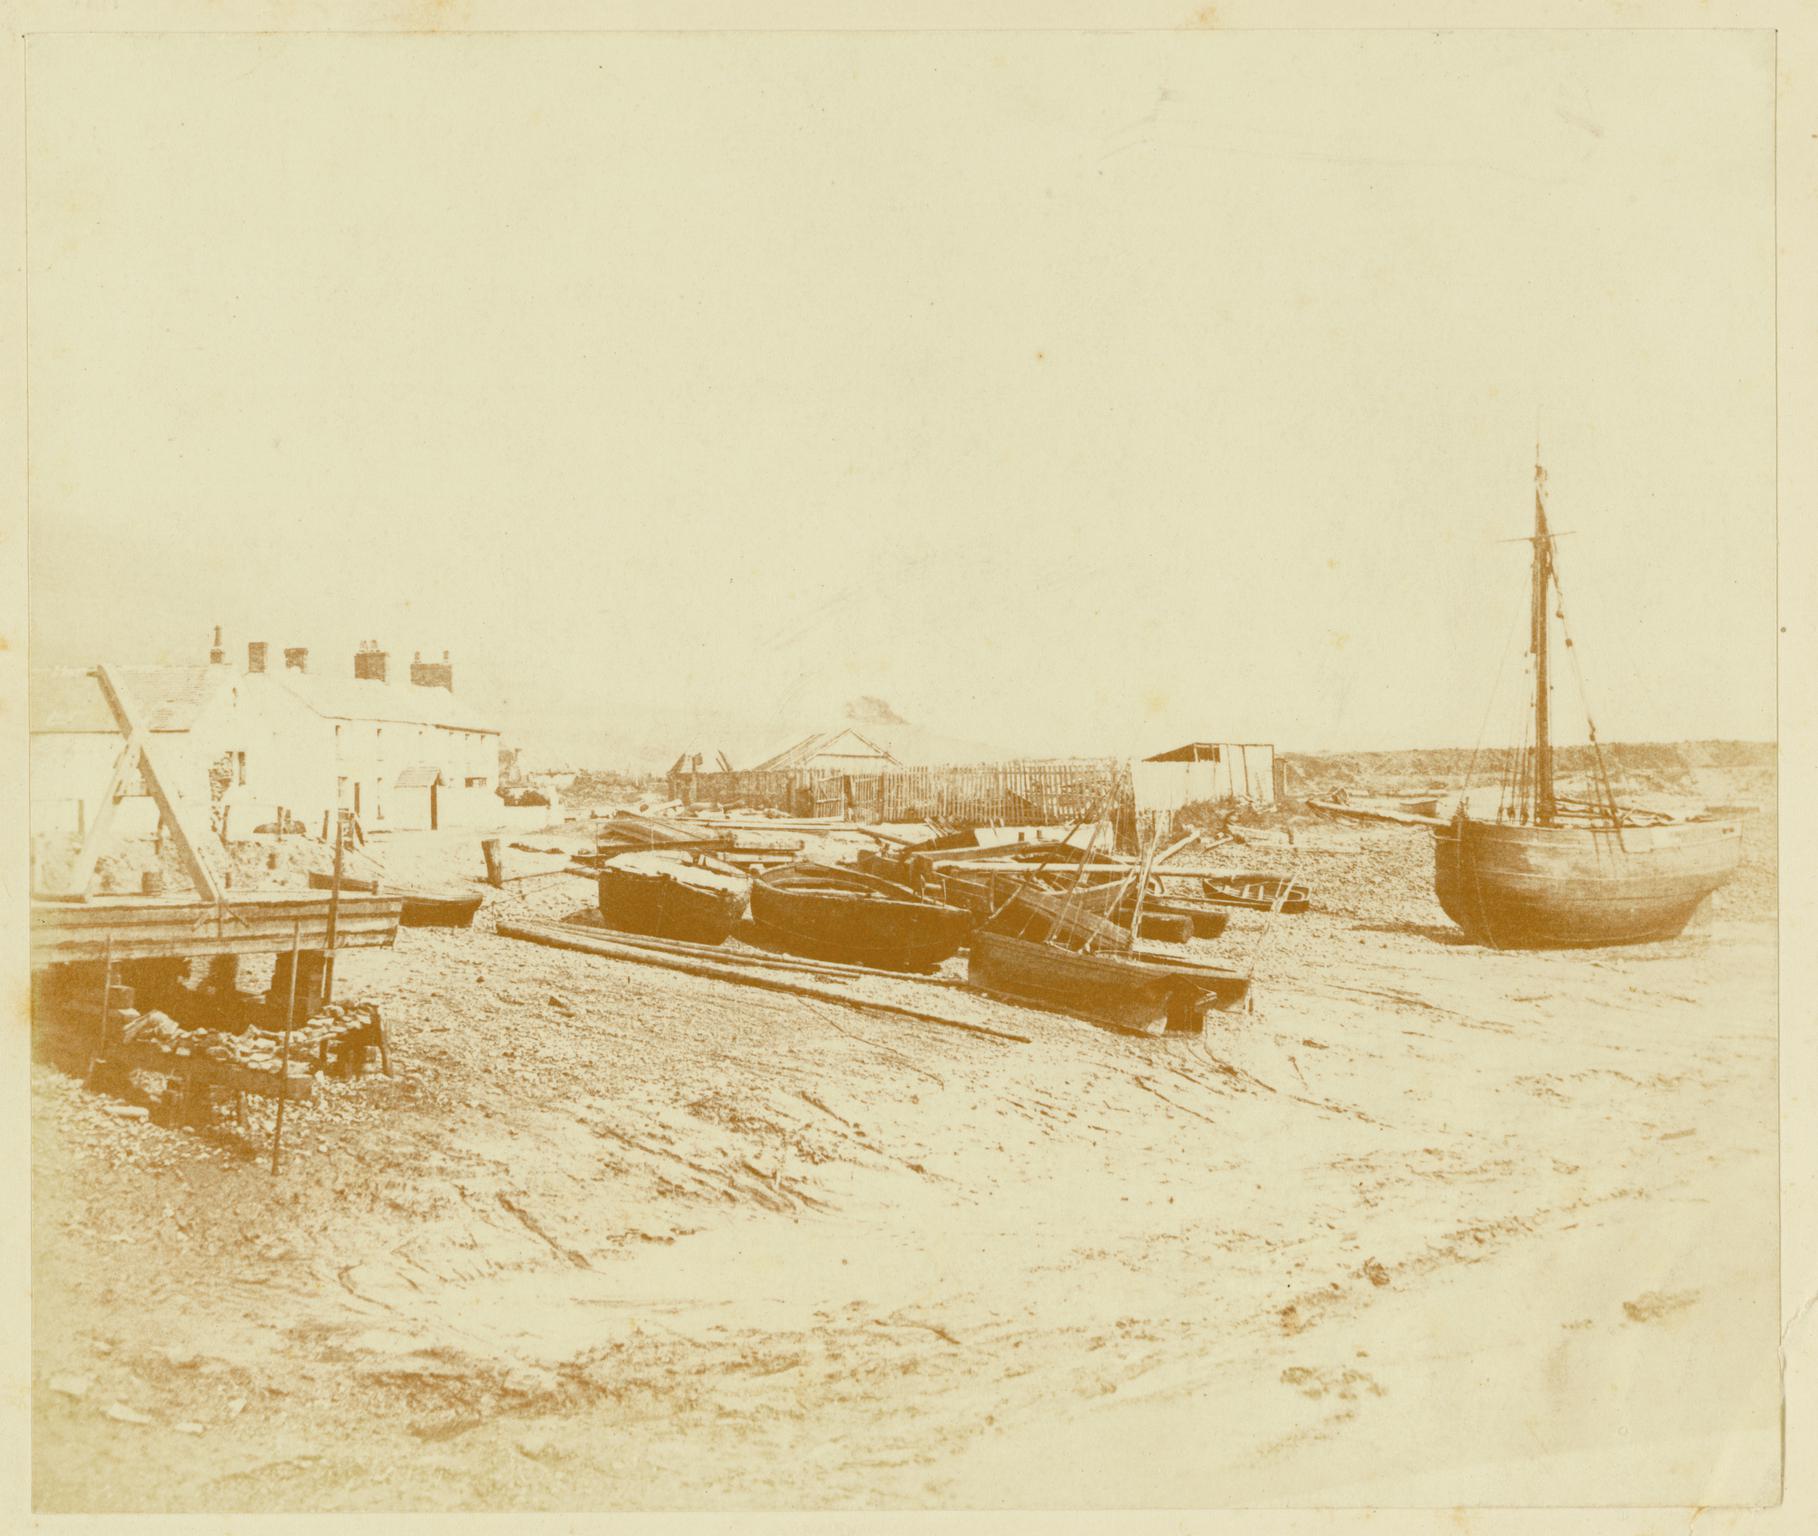 Smack and boats on beach, photograph